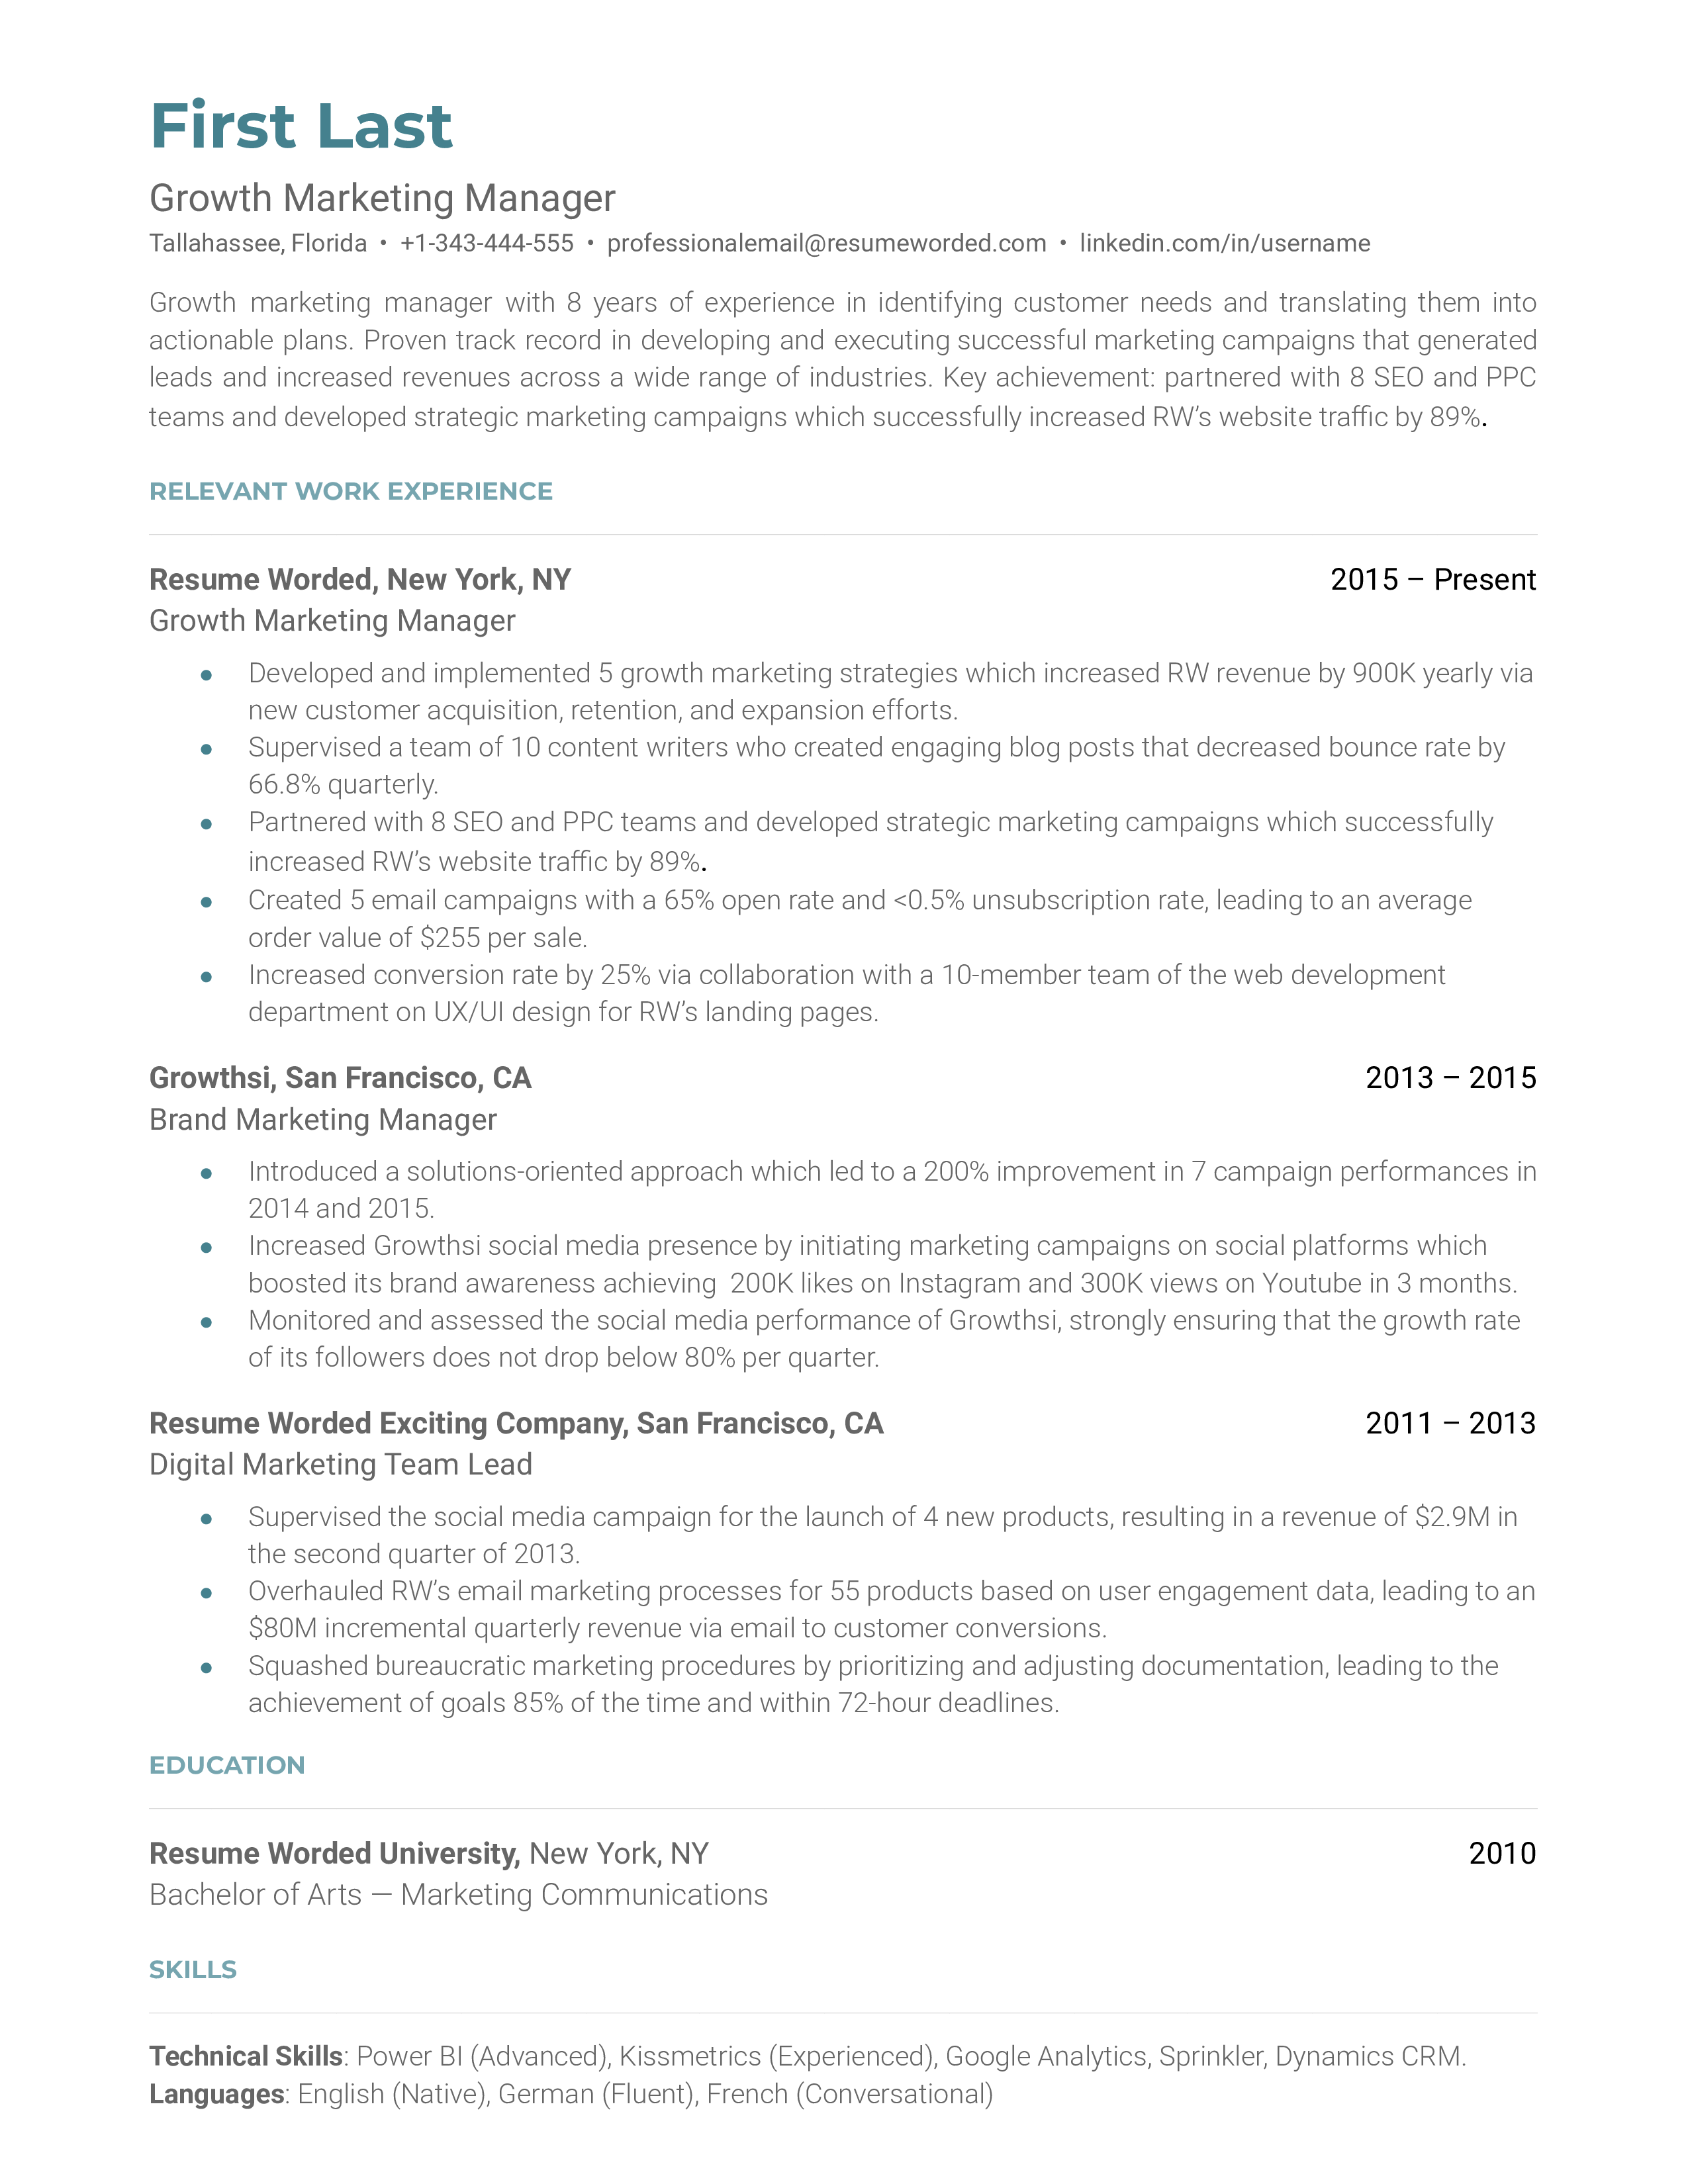 Growth marketing manager resume sample that highlights technical and communication skills.